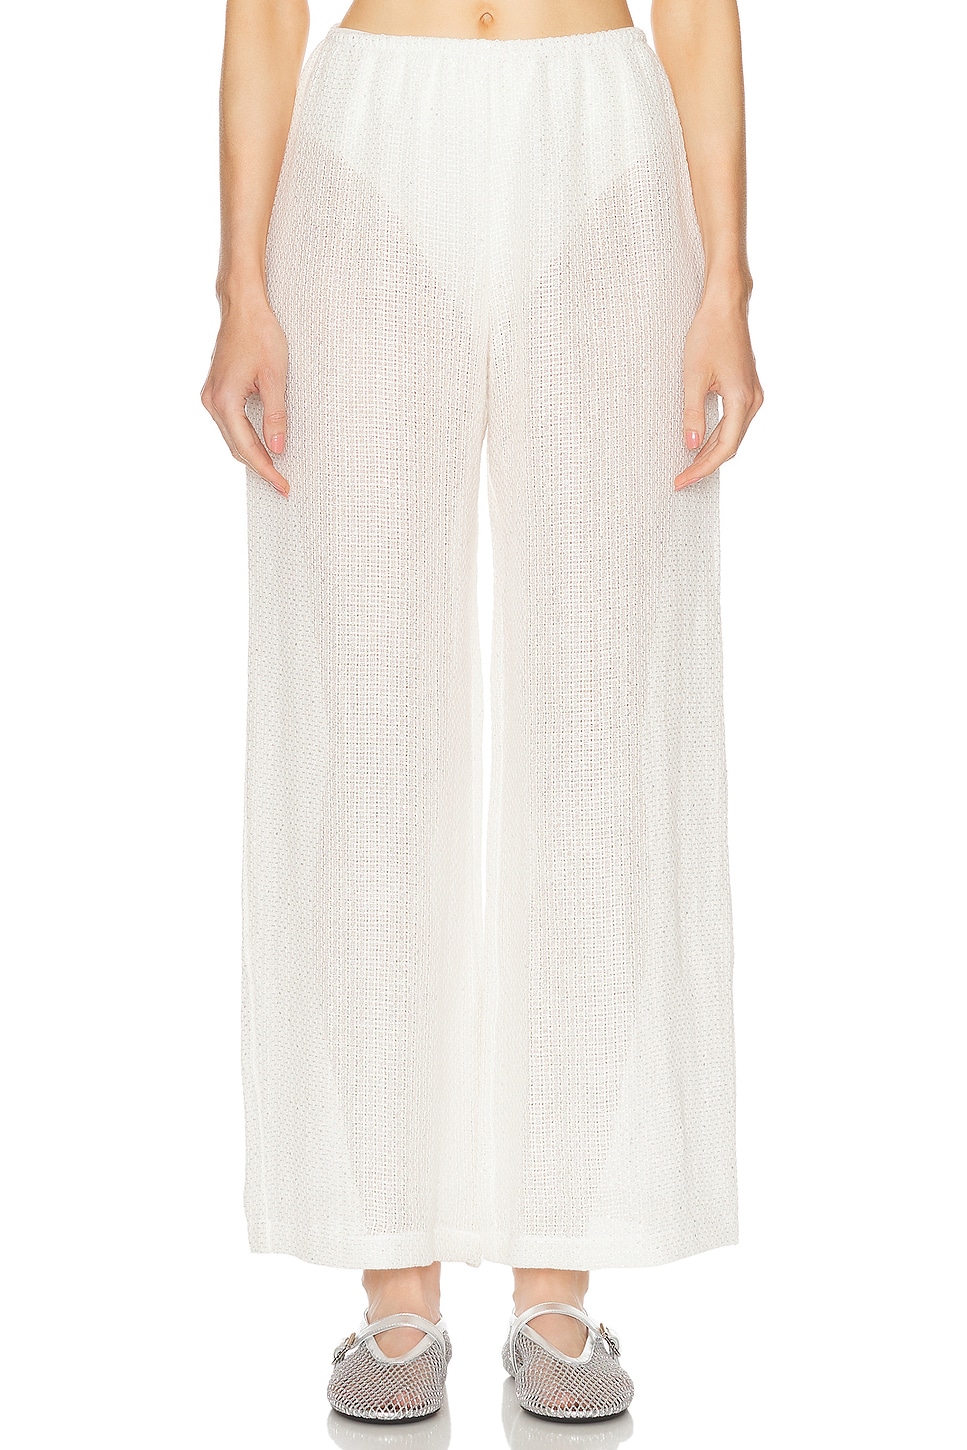 Image 1 of LESET Stella Wide Leg Pant in White